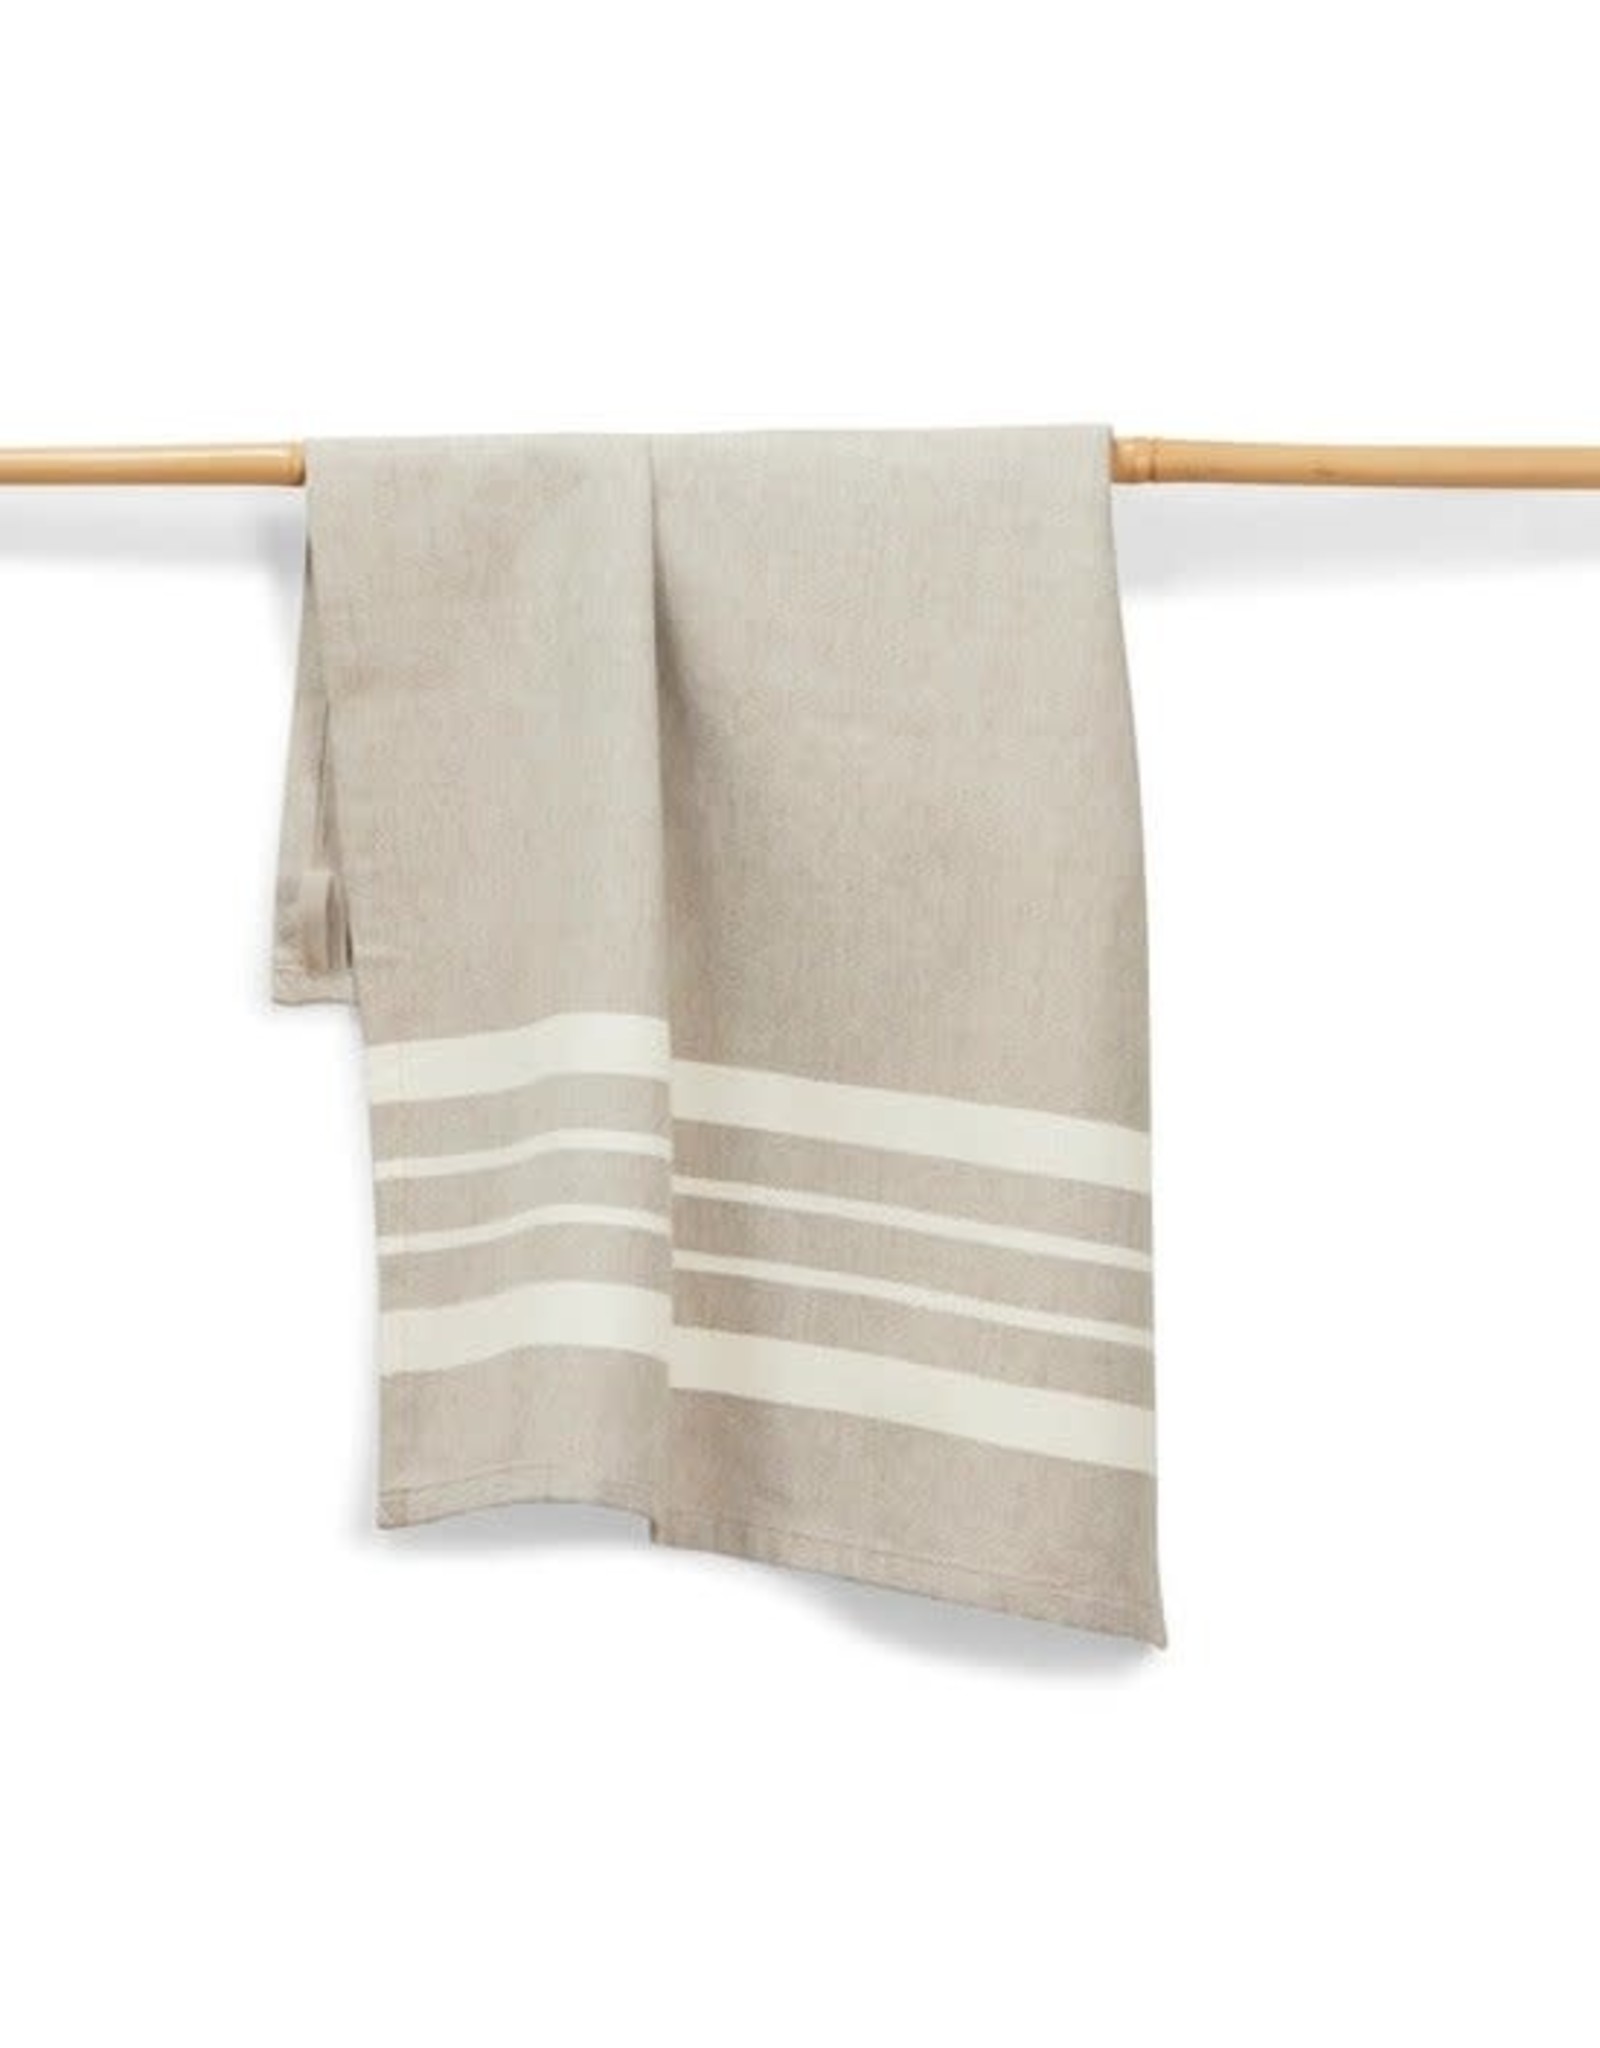 Trade roots 27 x 19 Cotton Handwoven Kitchen Towel, Chai, India